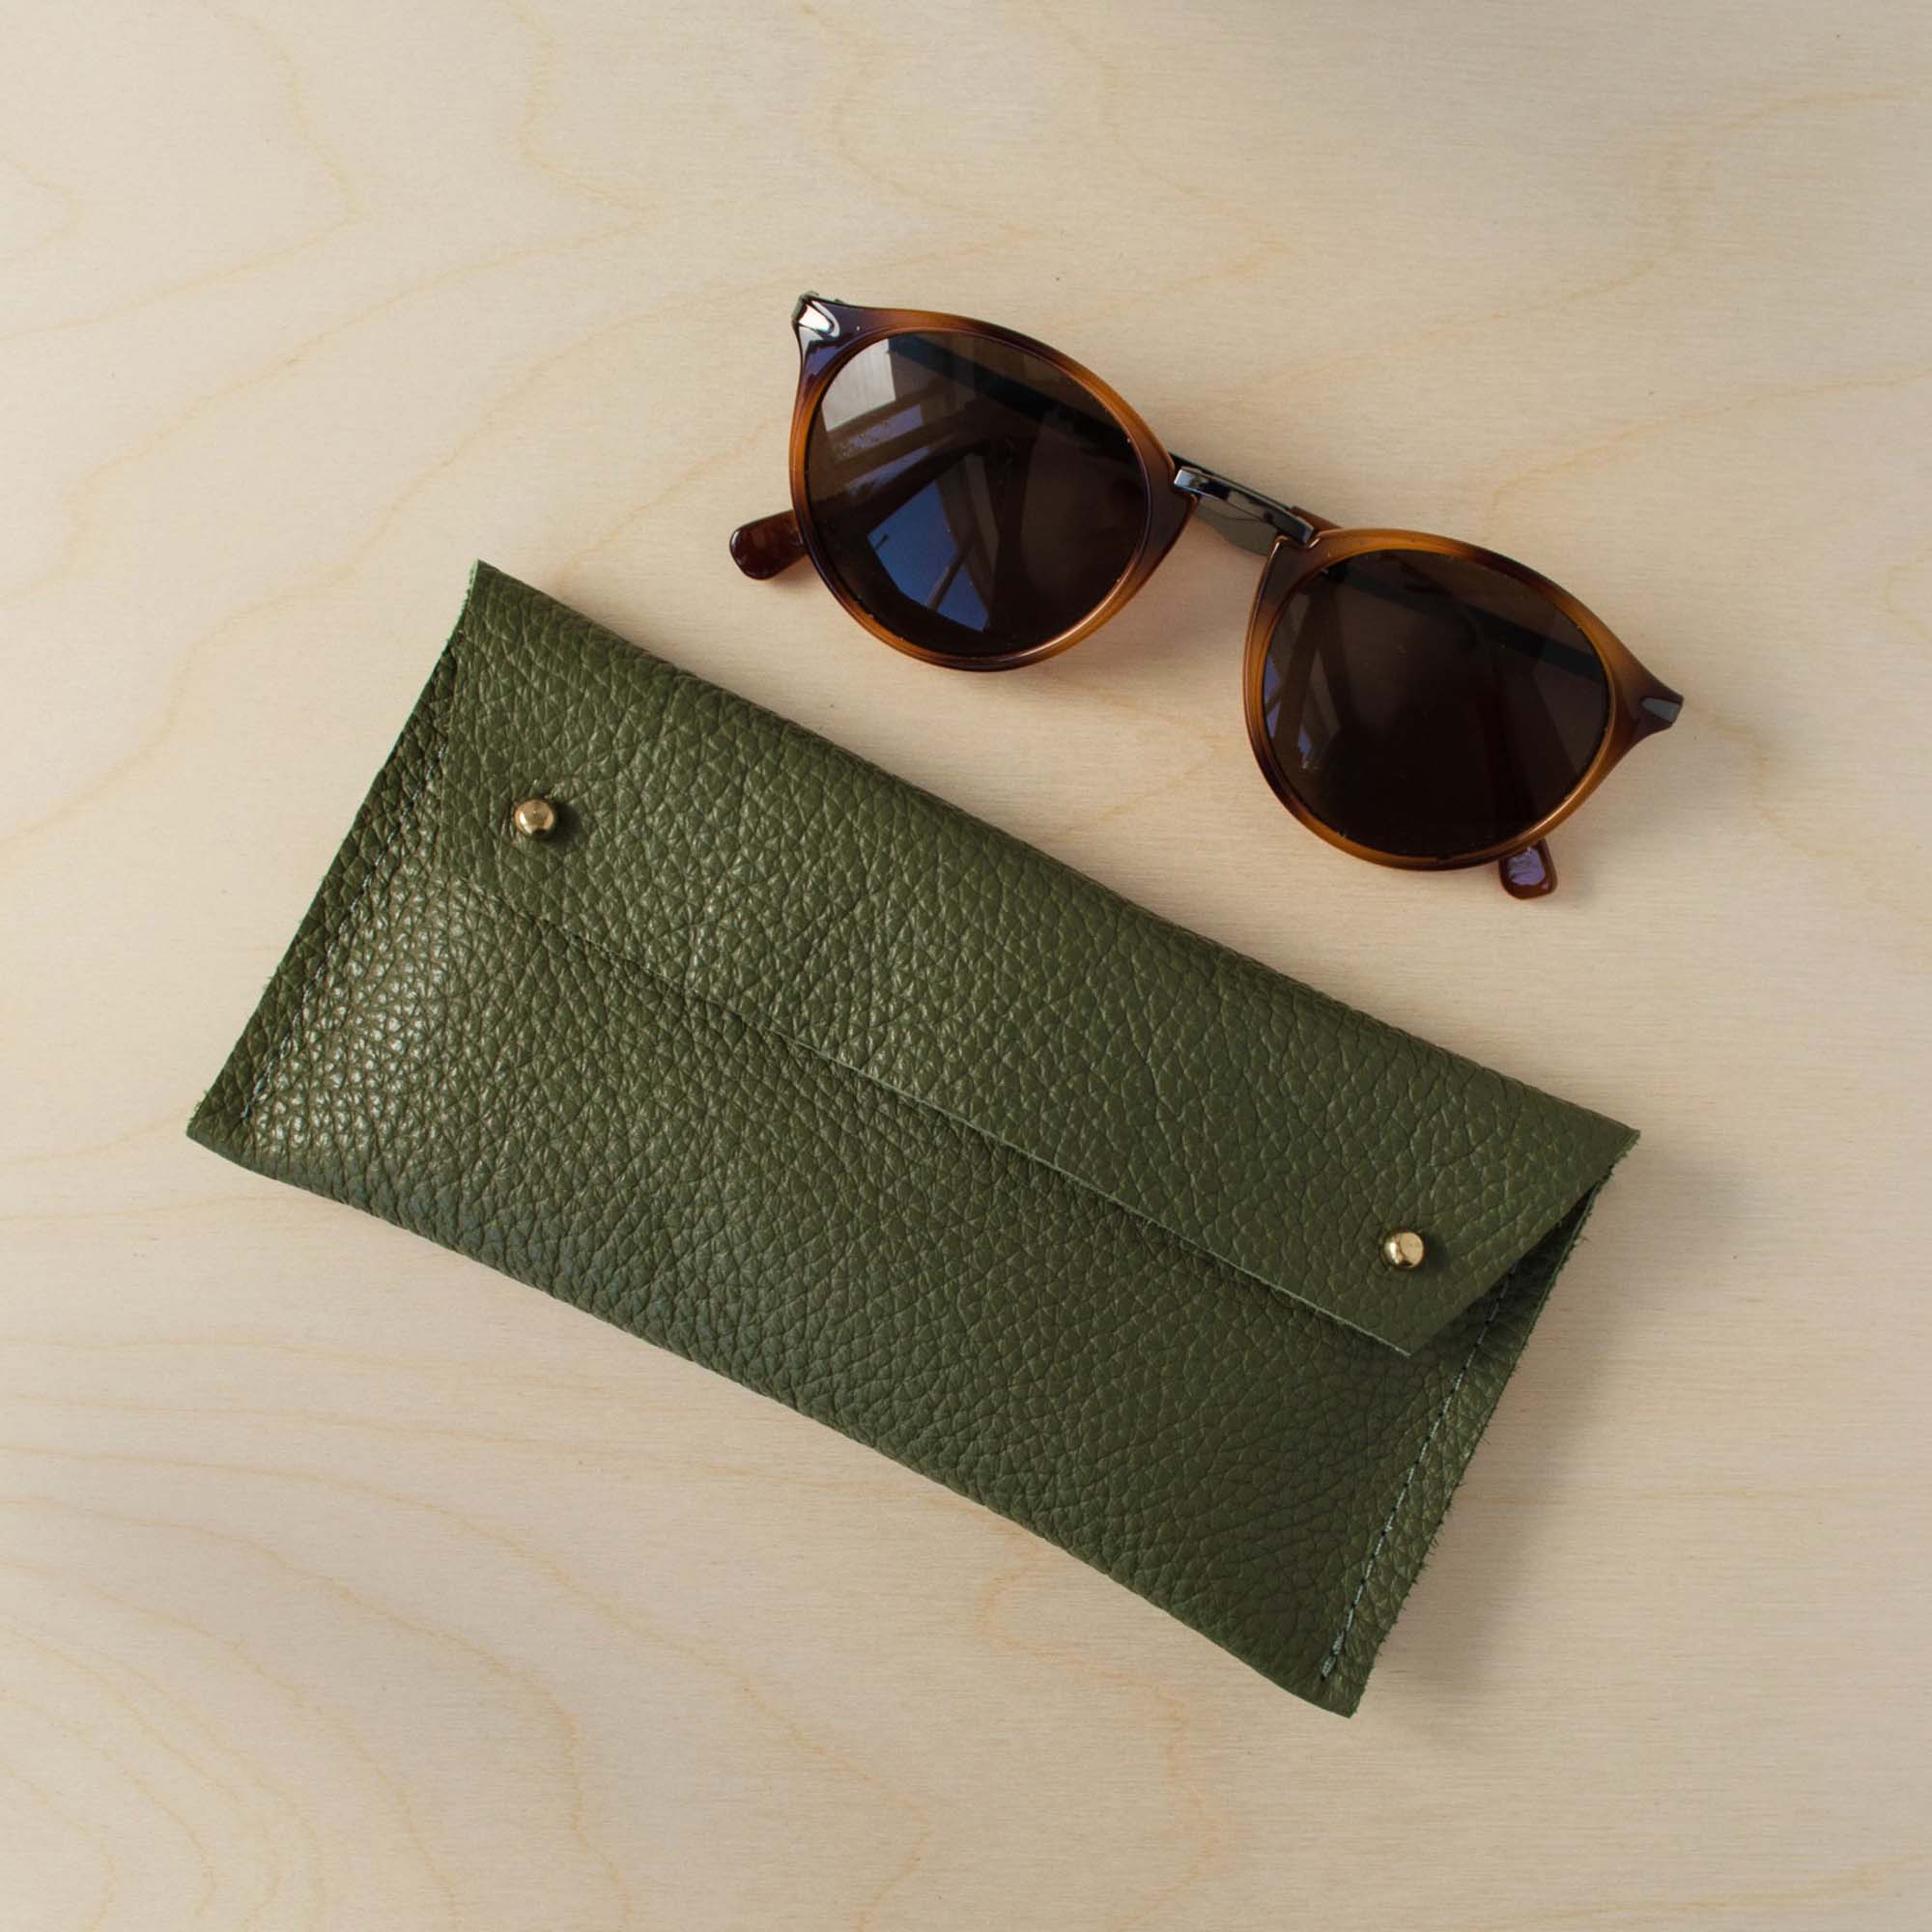 Olive green leather glasses case on a wooden background.